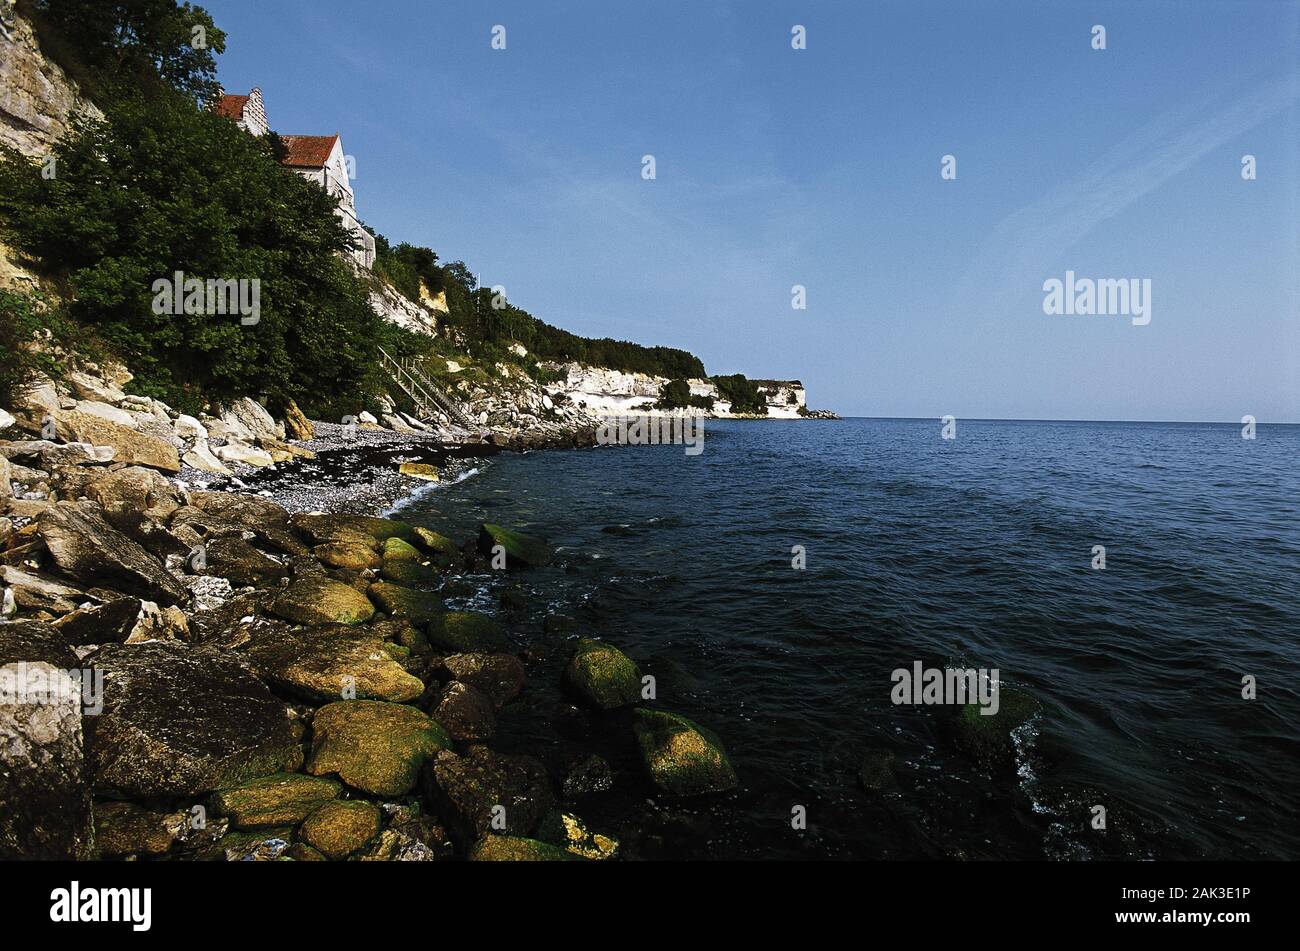 View of the chalk cliff Stevns Klint at the coast of the Baltic Sea of the island of Sealand (Sjaeland) near Hoejerup in Denmark. On the top of the cl Stock Photo